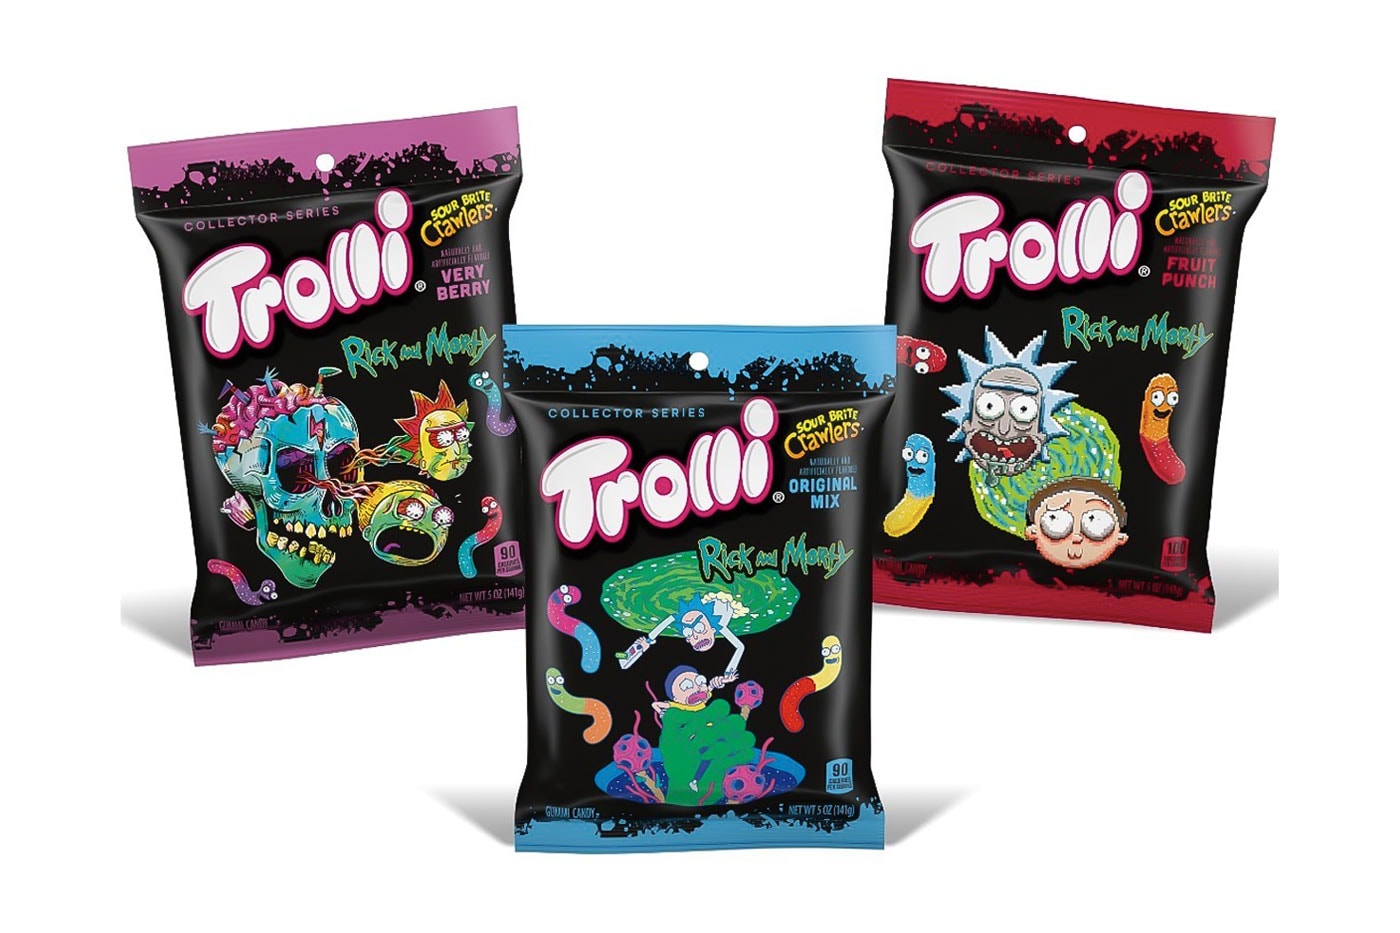 Rick and Morty Trolli Sour Brite Crawlers collab announcement release info adult swim 